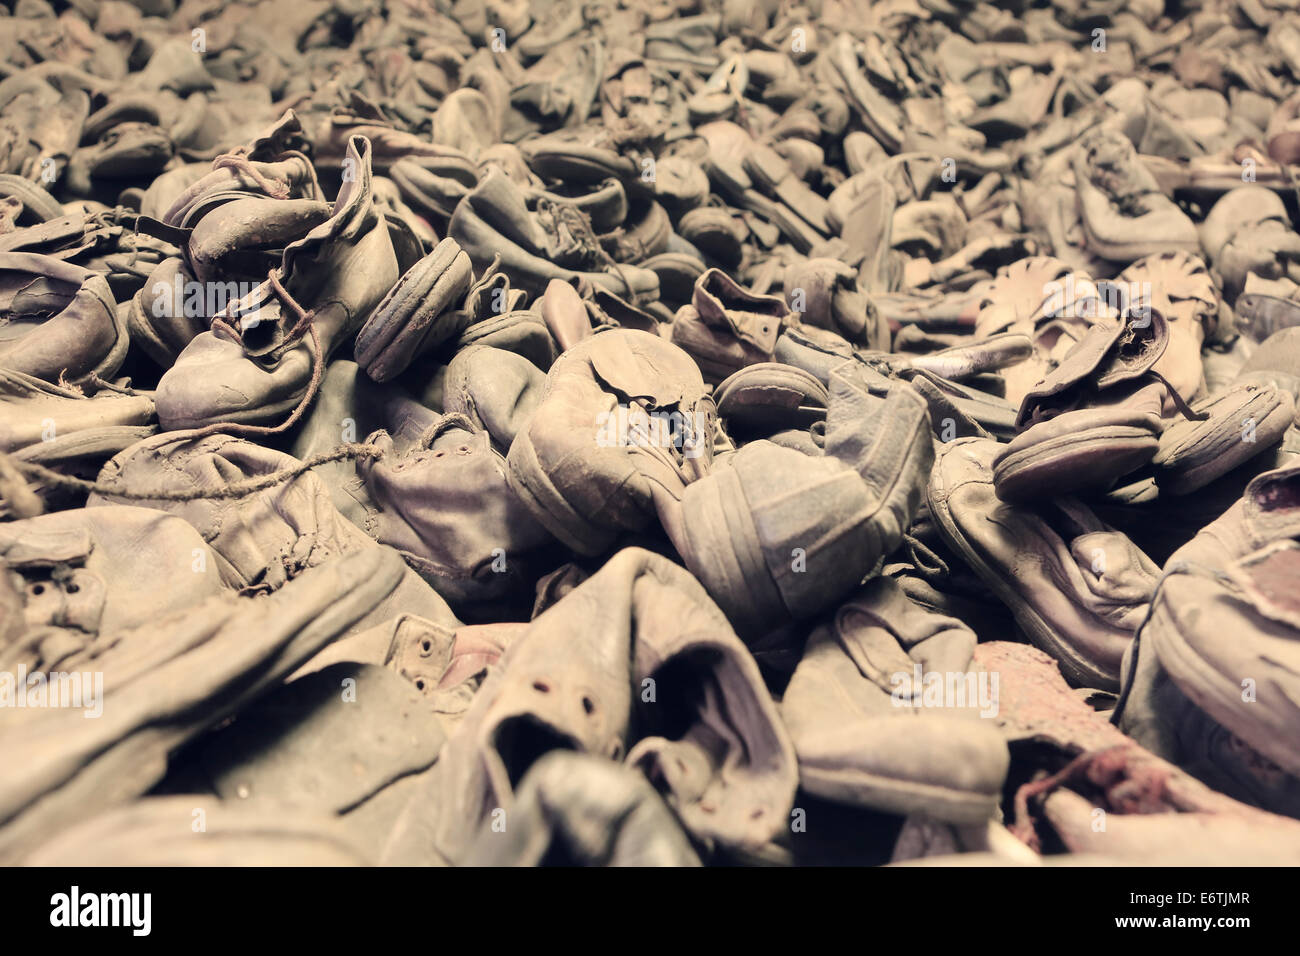 Shoes Belonging To Jewish Victims Of The Holocaust In The Stock